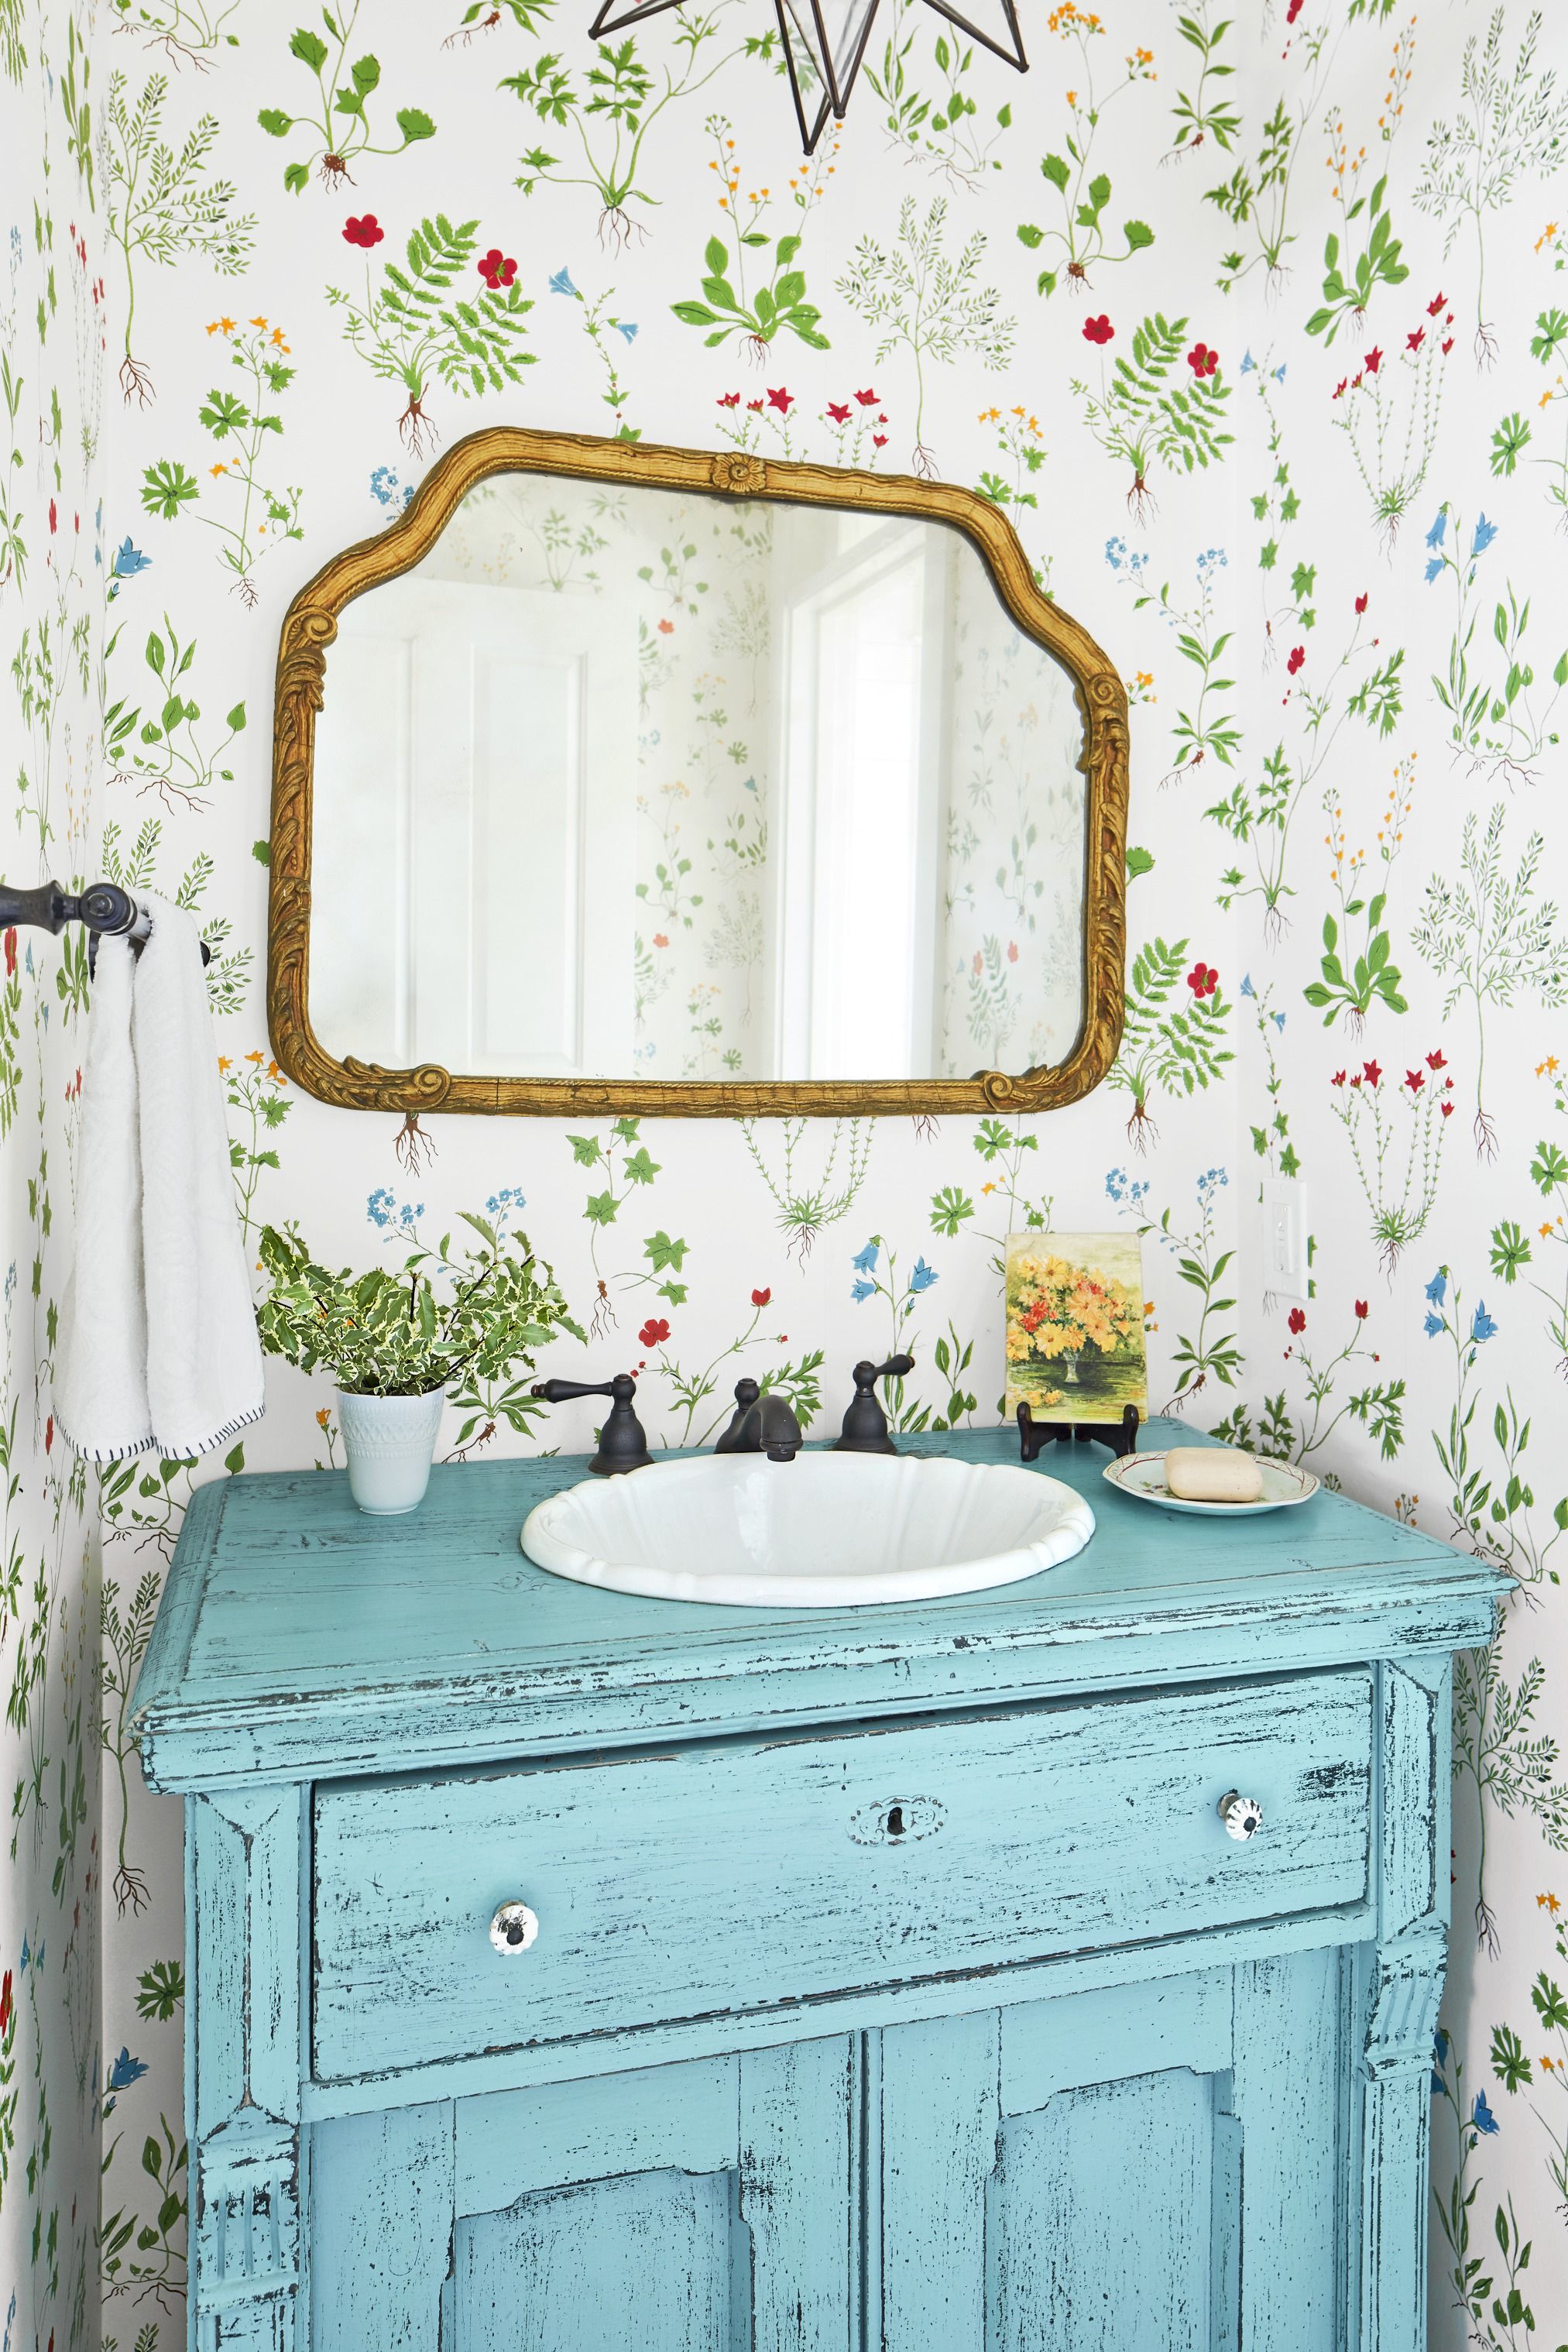 20 Best Small Bathroom Ideas with Paint and Storage Inspiration